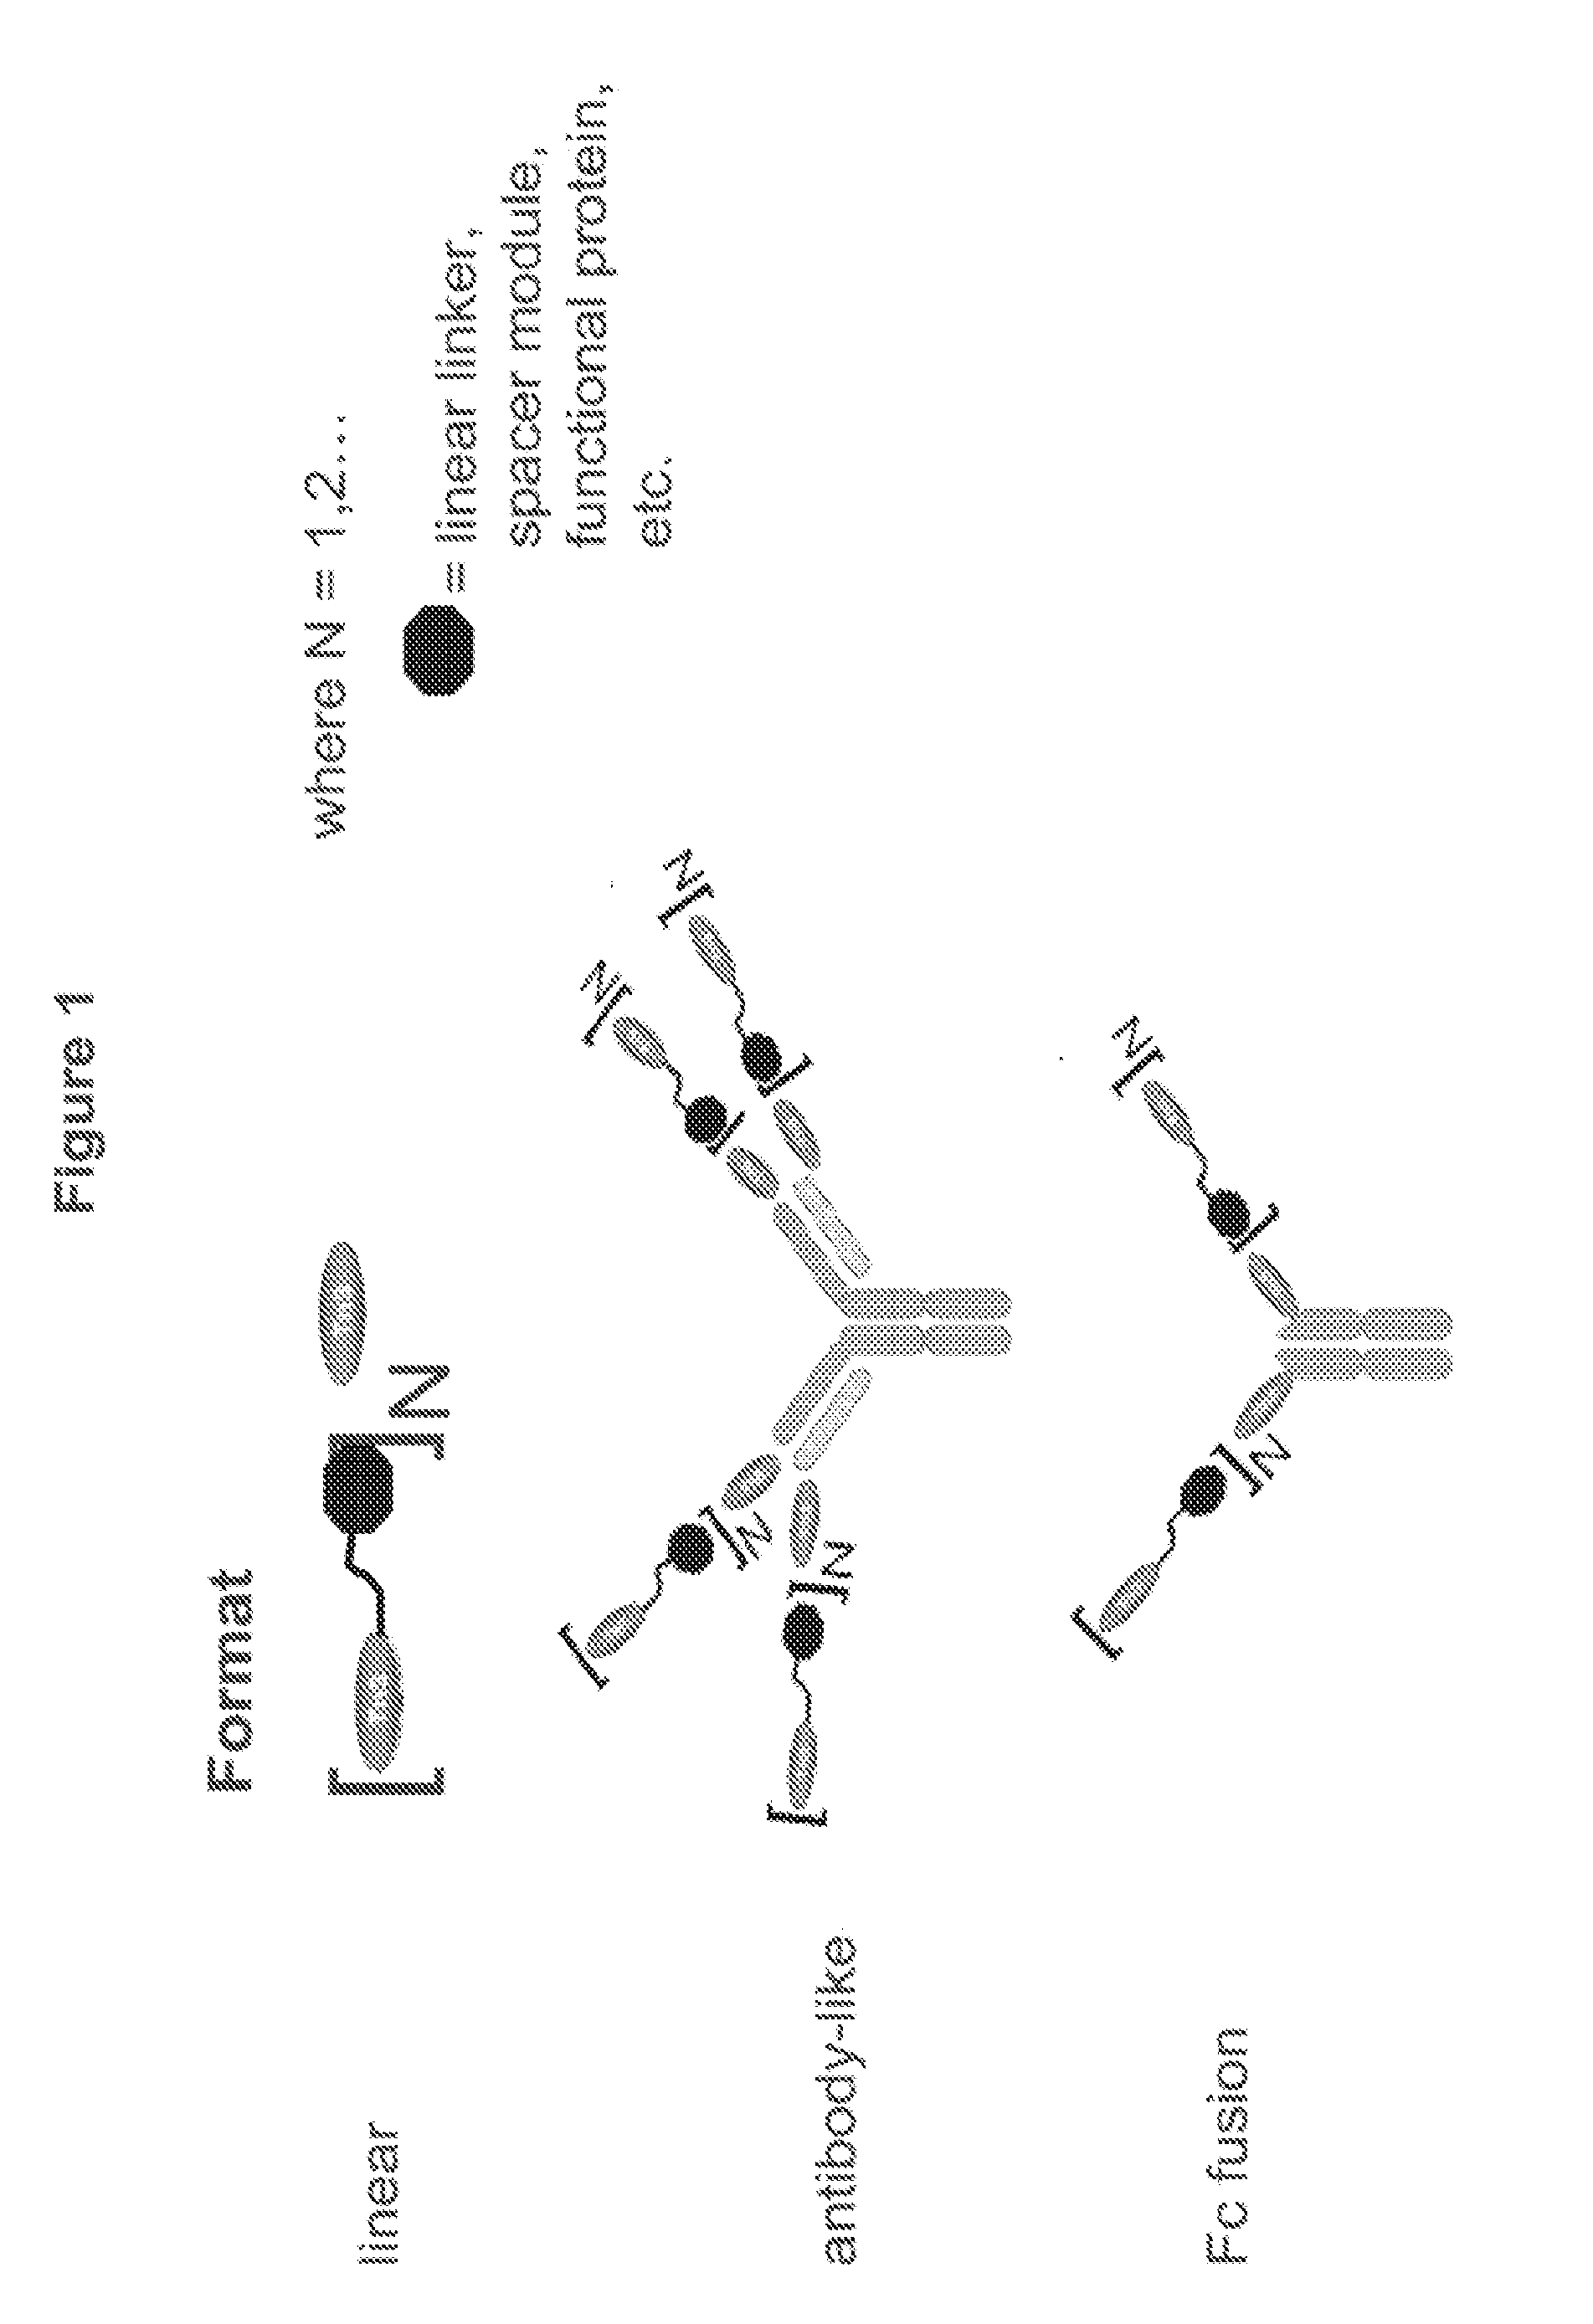 Trail r2-specific multimeric scaffolds